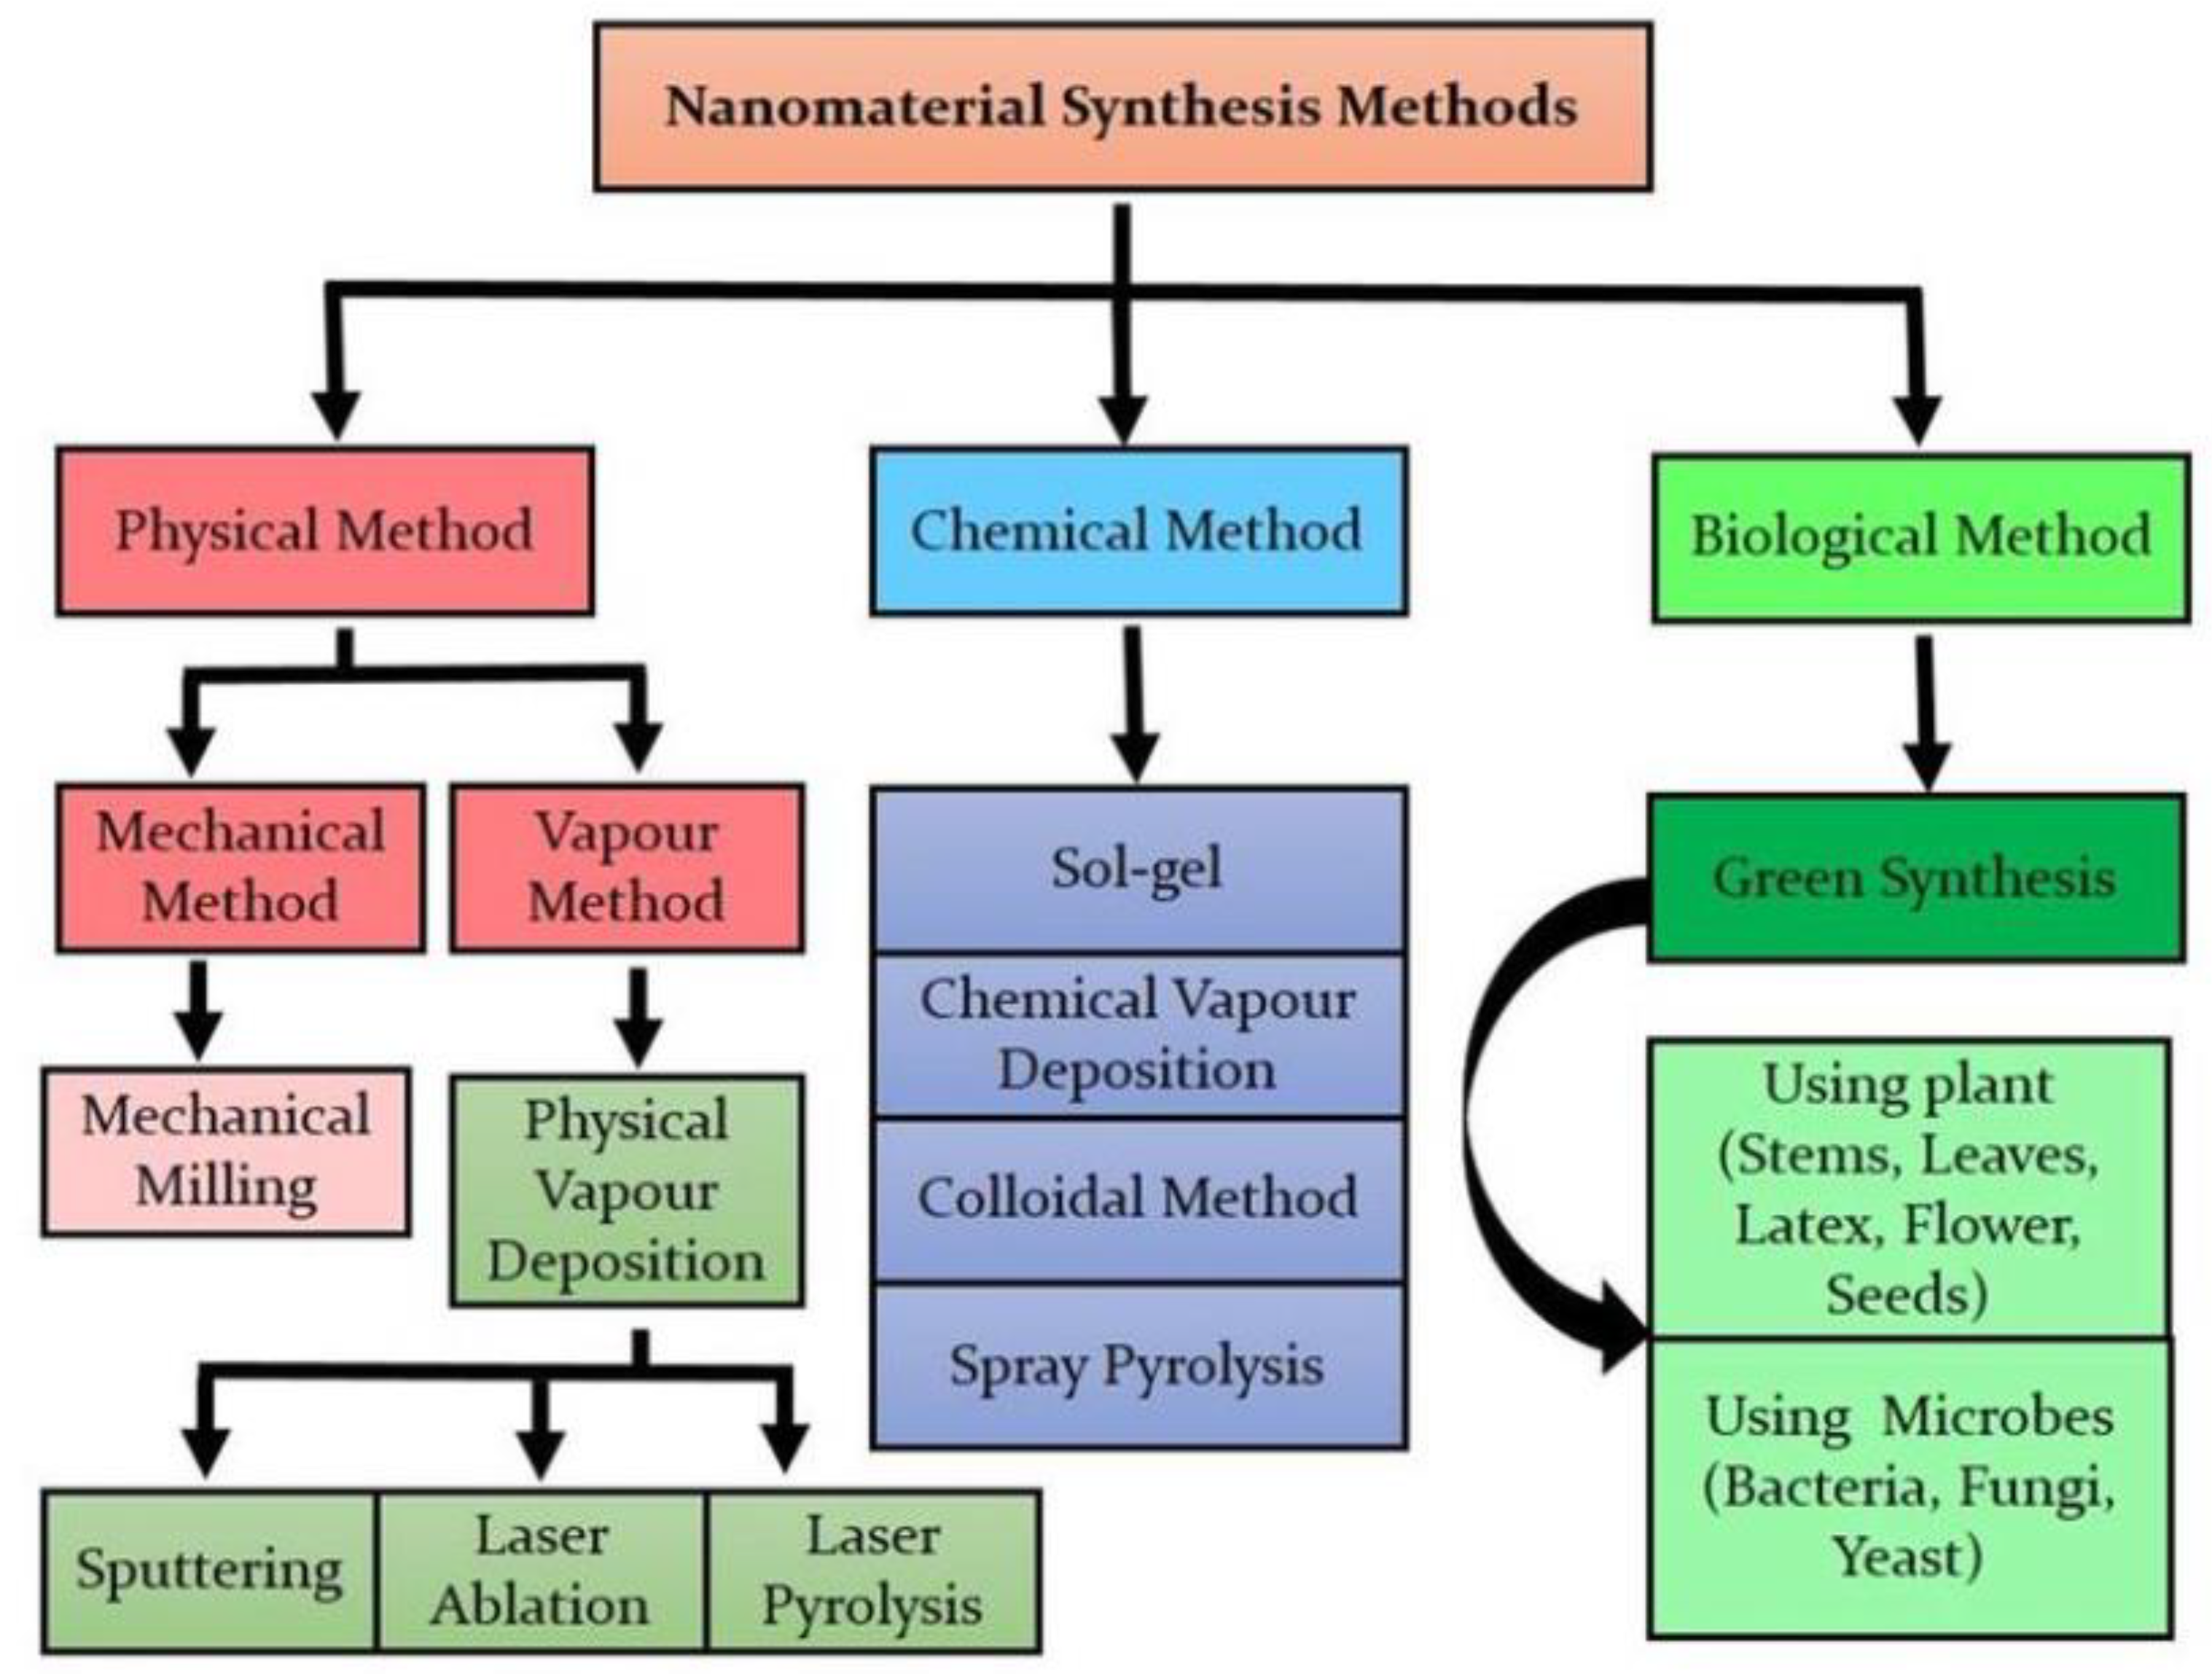 Treatment method. Synthesis of Nanoparticles. Green Synthesis. Metal Nanoparticle Synthesis methods. Chemical Synthesis of Nanoparticles.